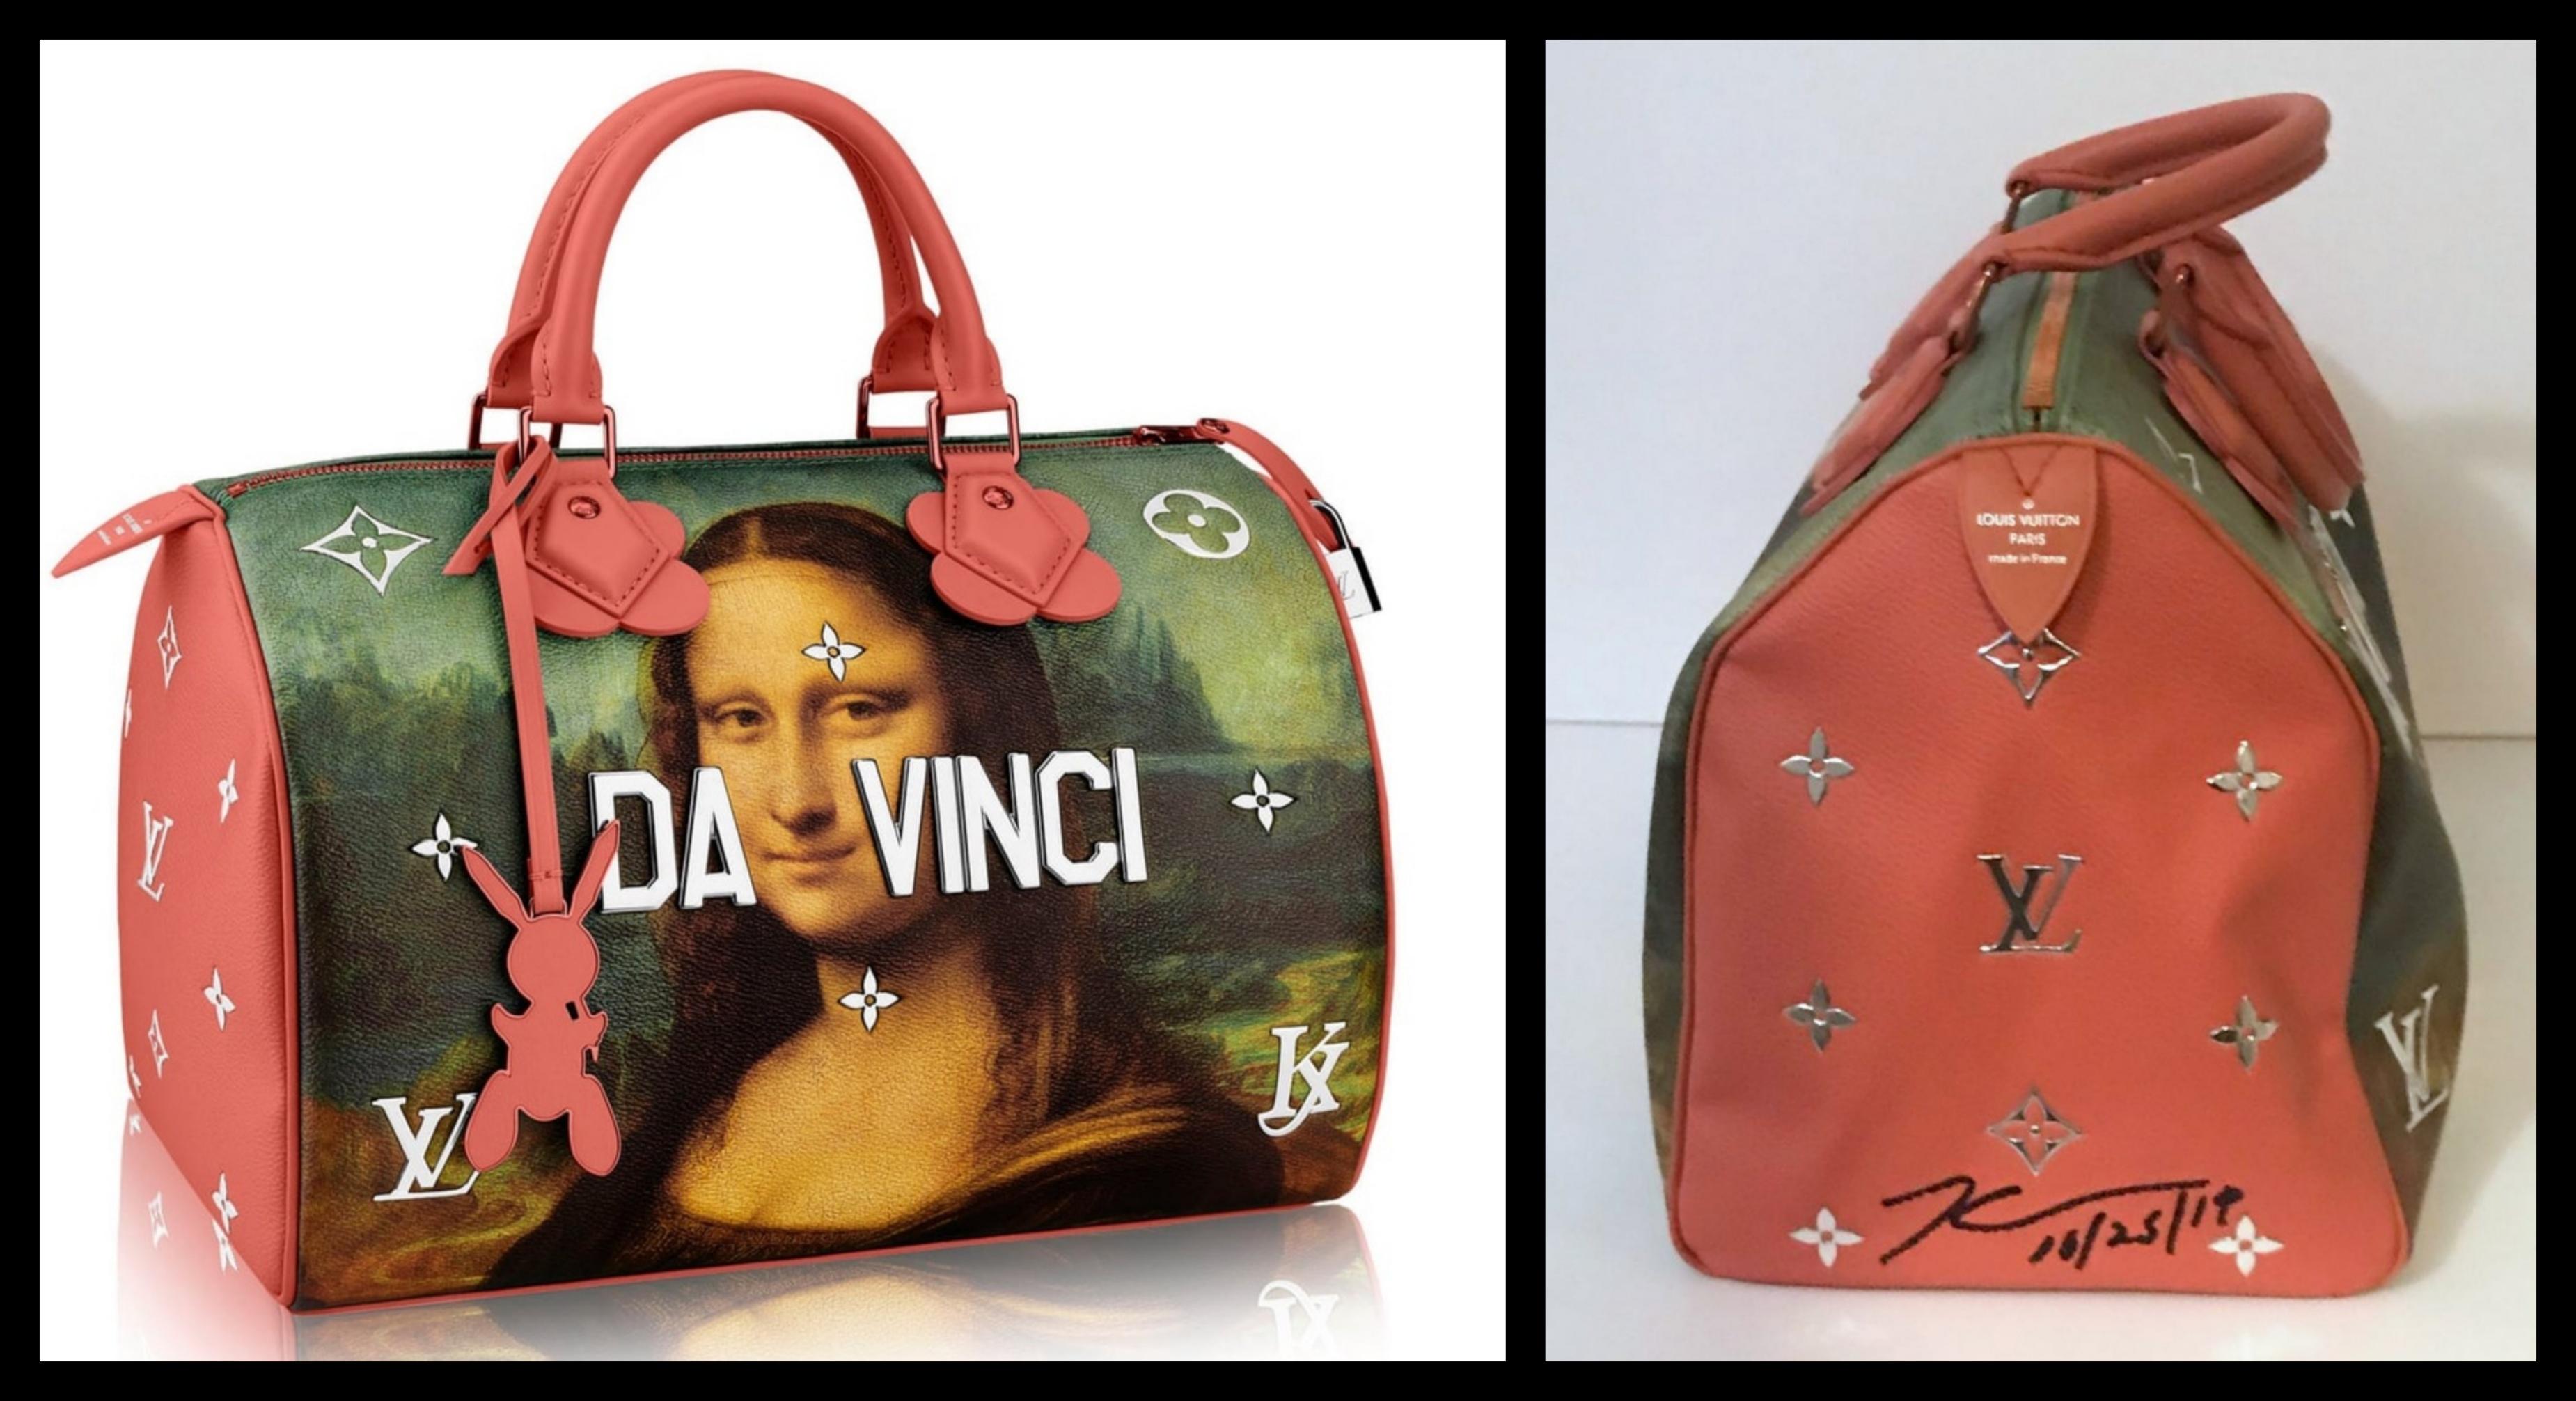 Jeff Koons
Louis Vuitton Da Vinci bag (signed and dated by Jeff Koons), 2017
Limited Edition print with mixed media accessories and embellishments on LVMH handbag. Uniquely hand signed by Jeff Koons  - the regular editions of this bag are not hand